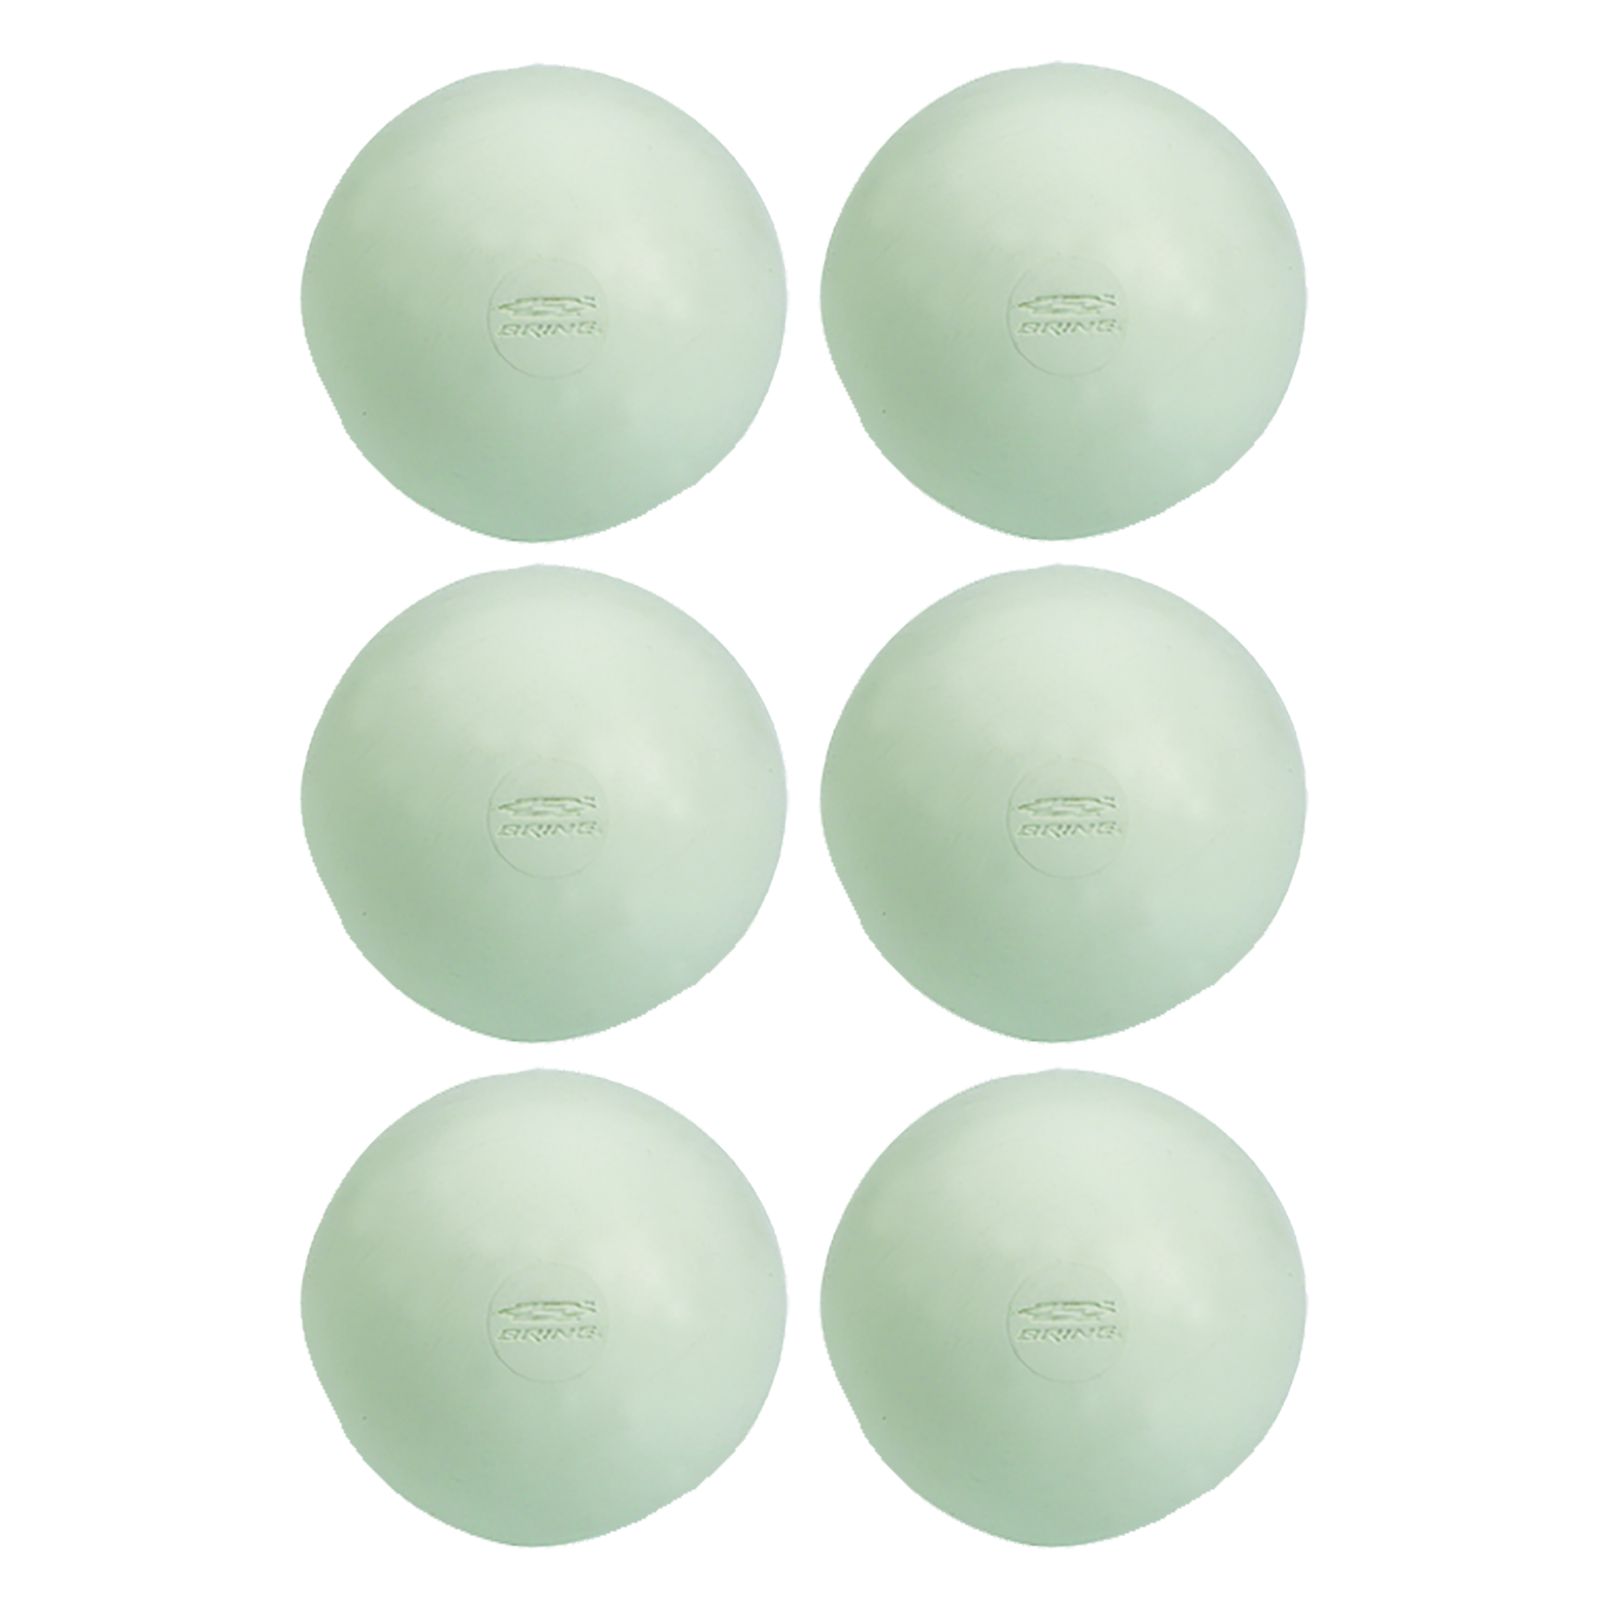 Lax Ball 6-Pack, White image number 0